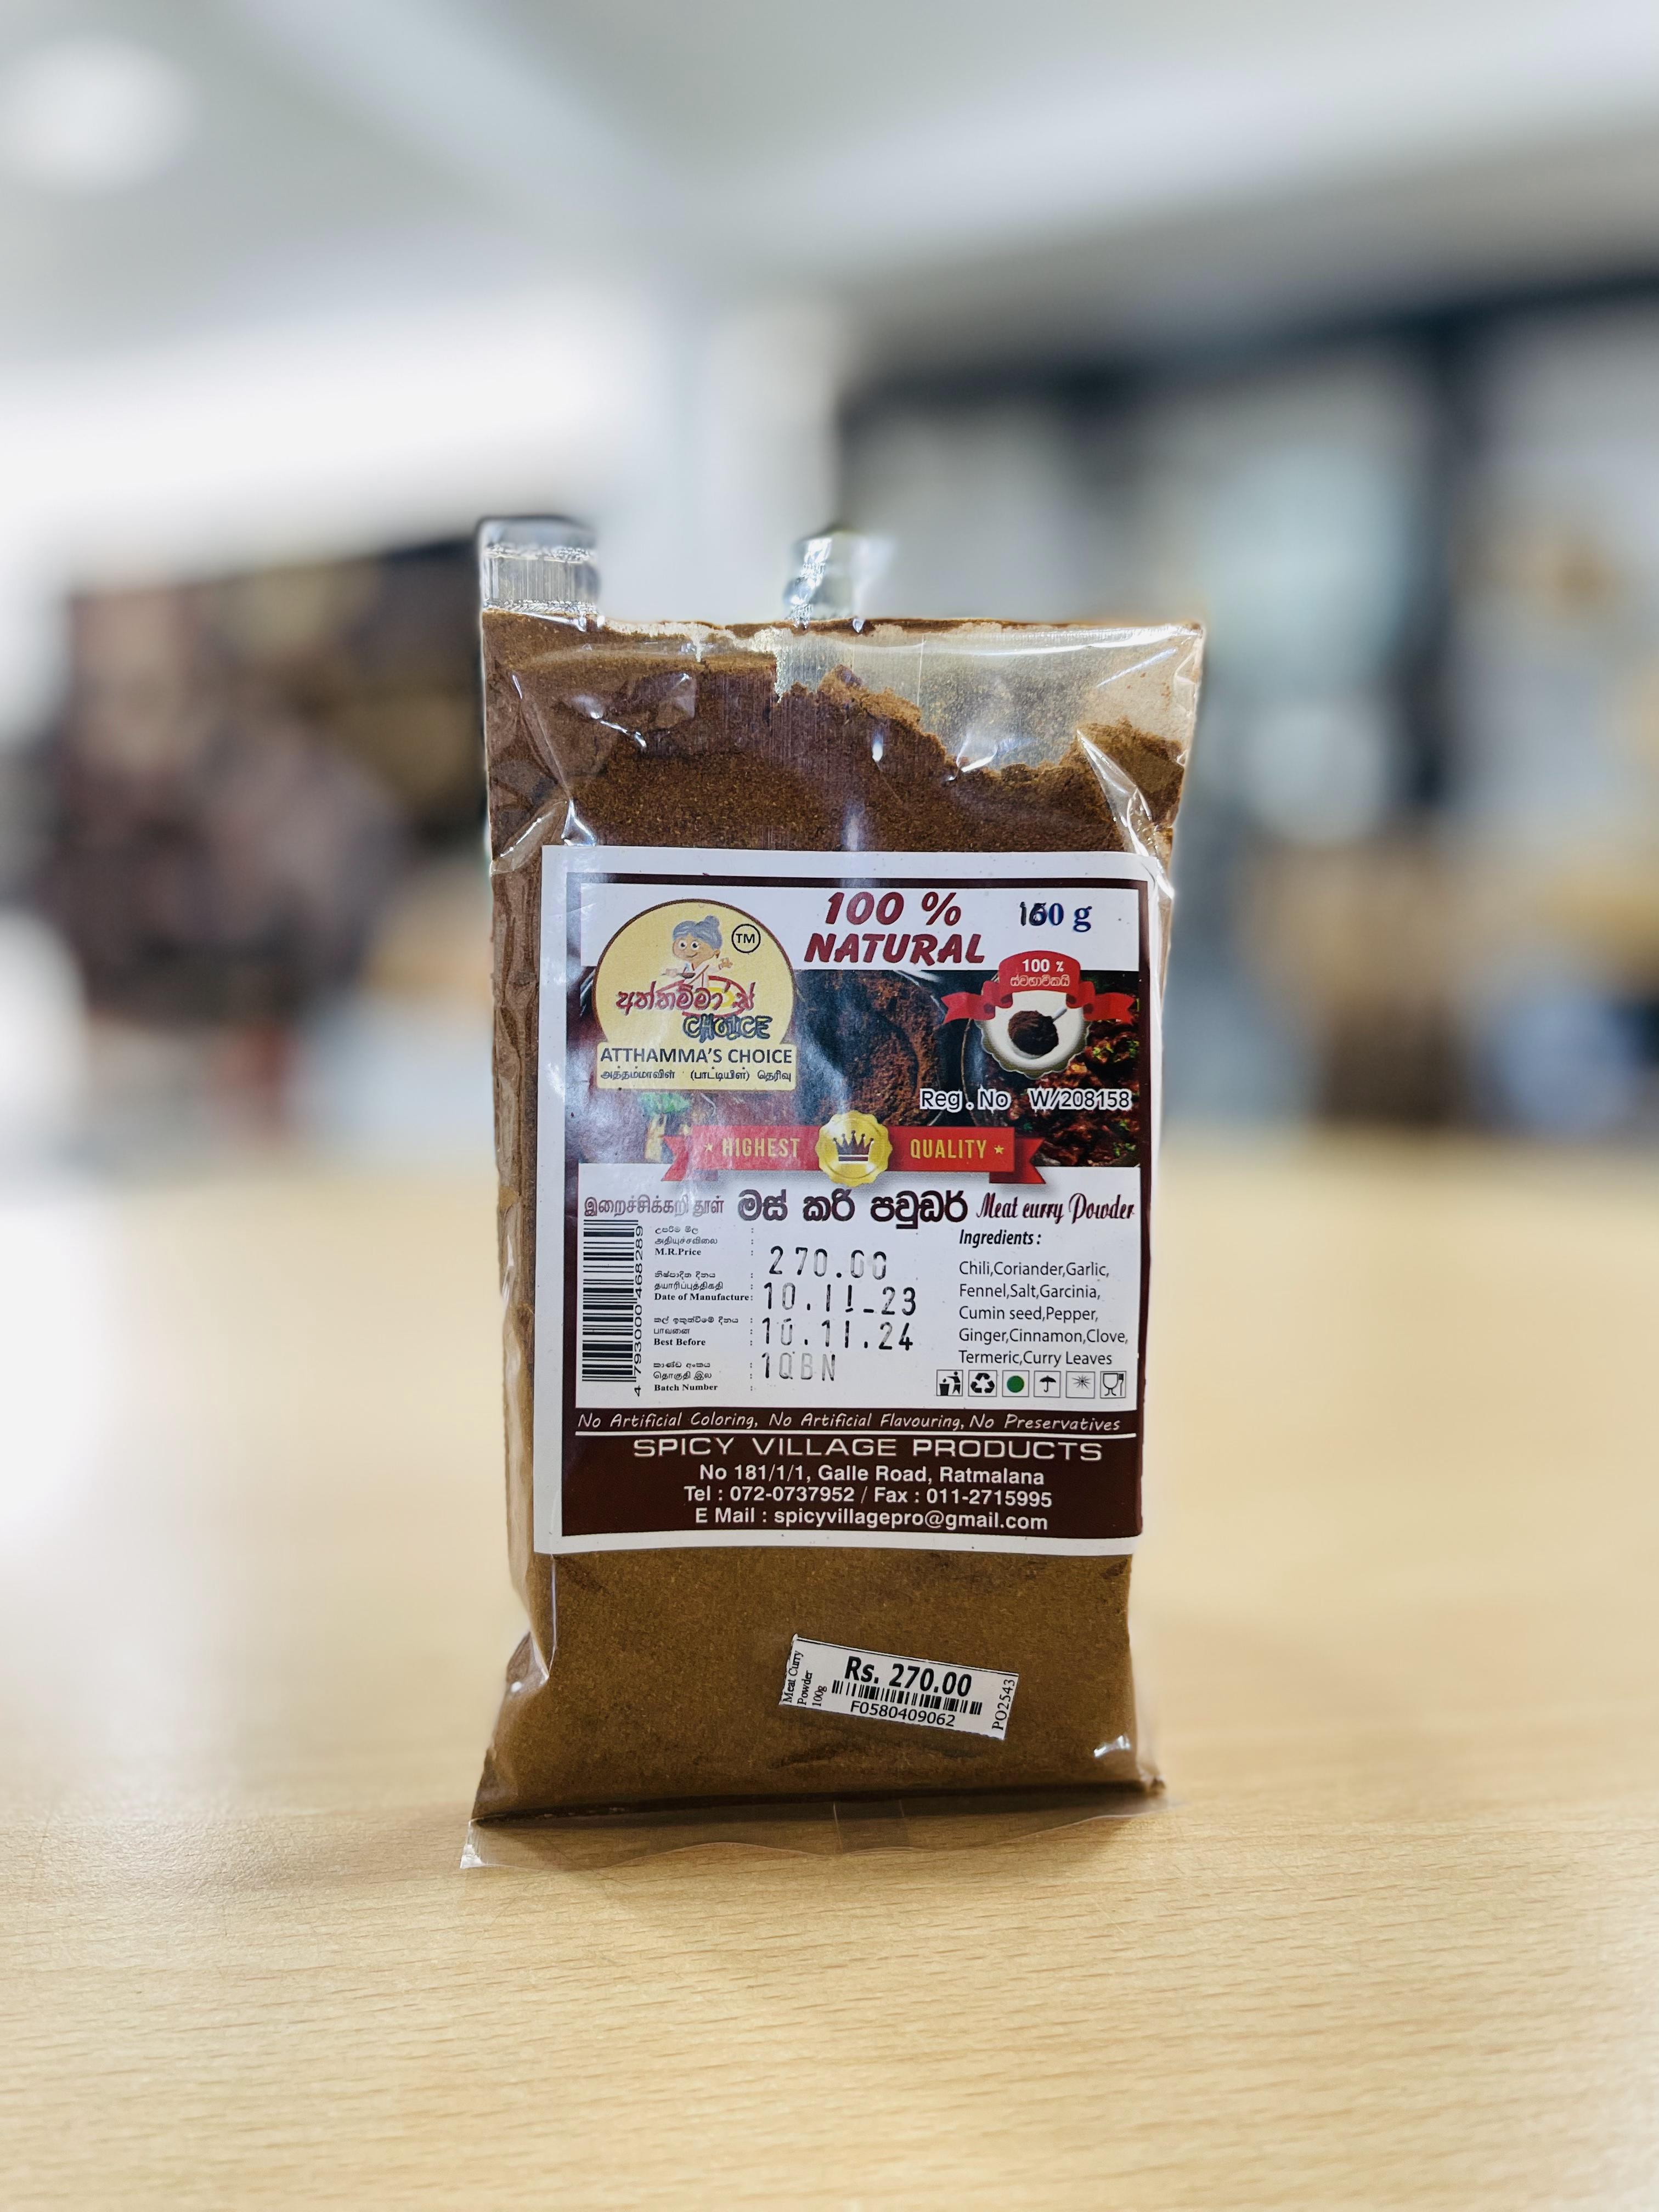 Meat Curry Powder